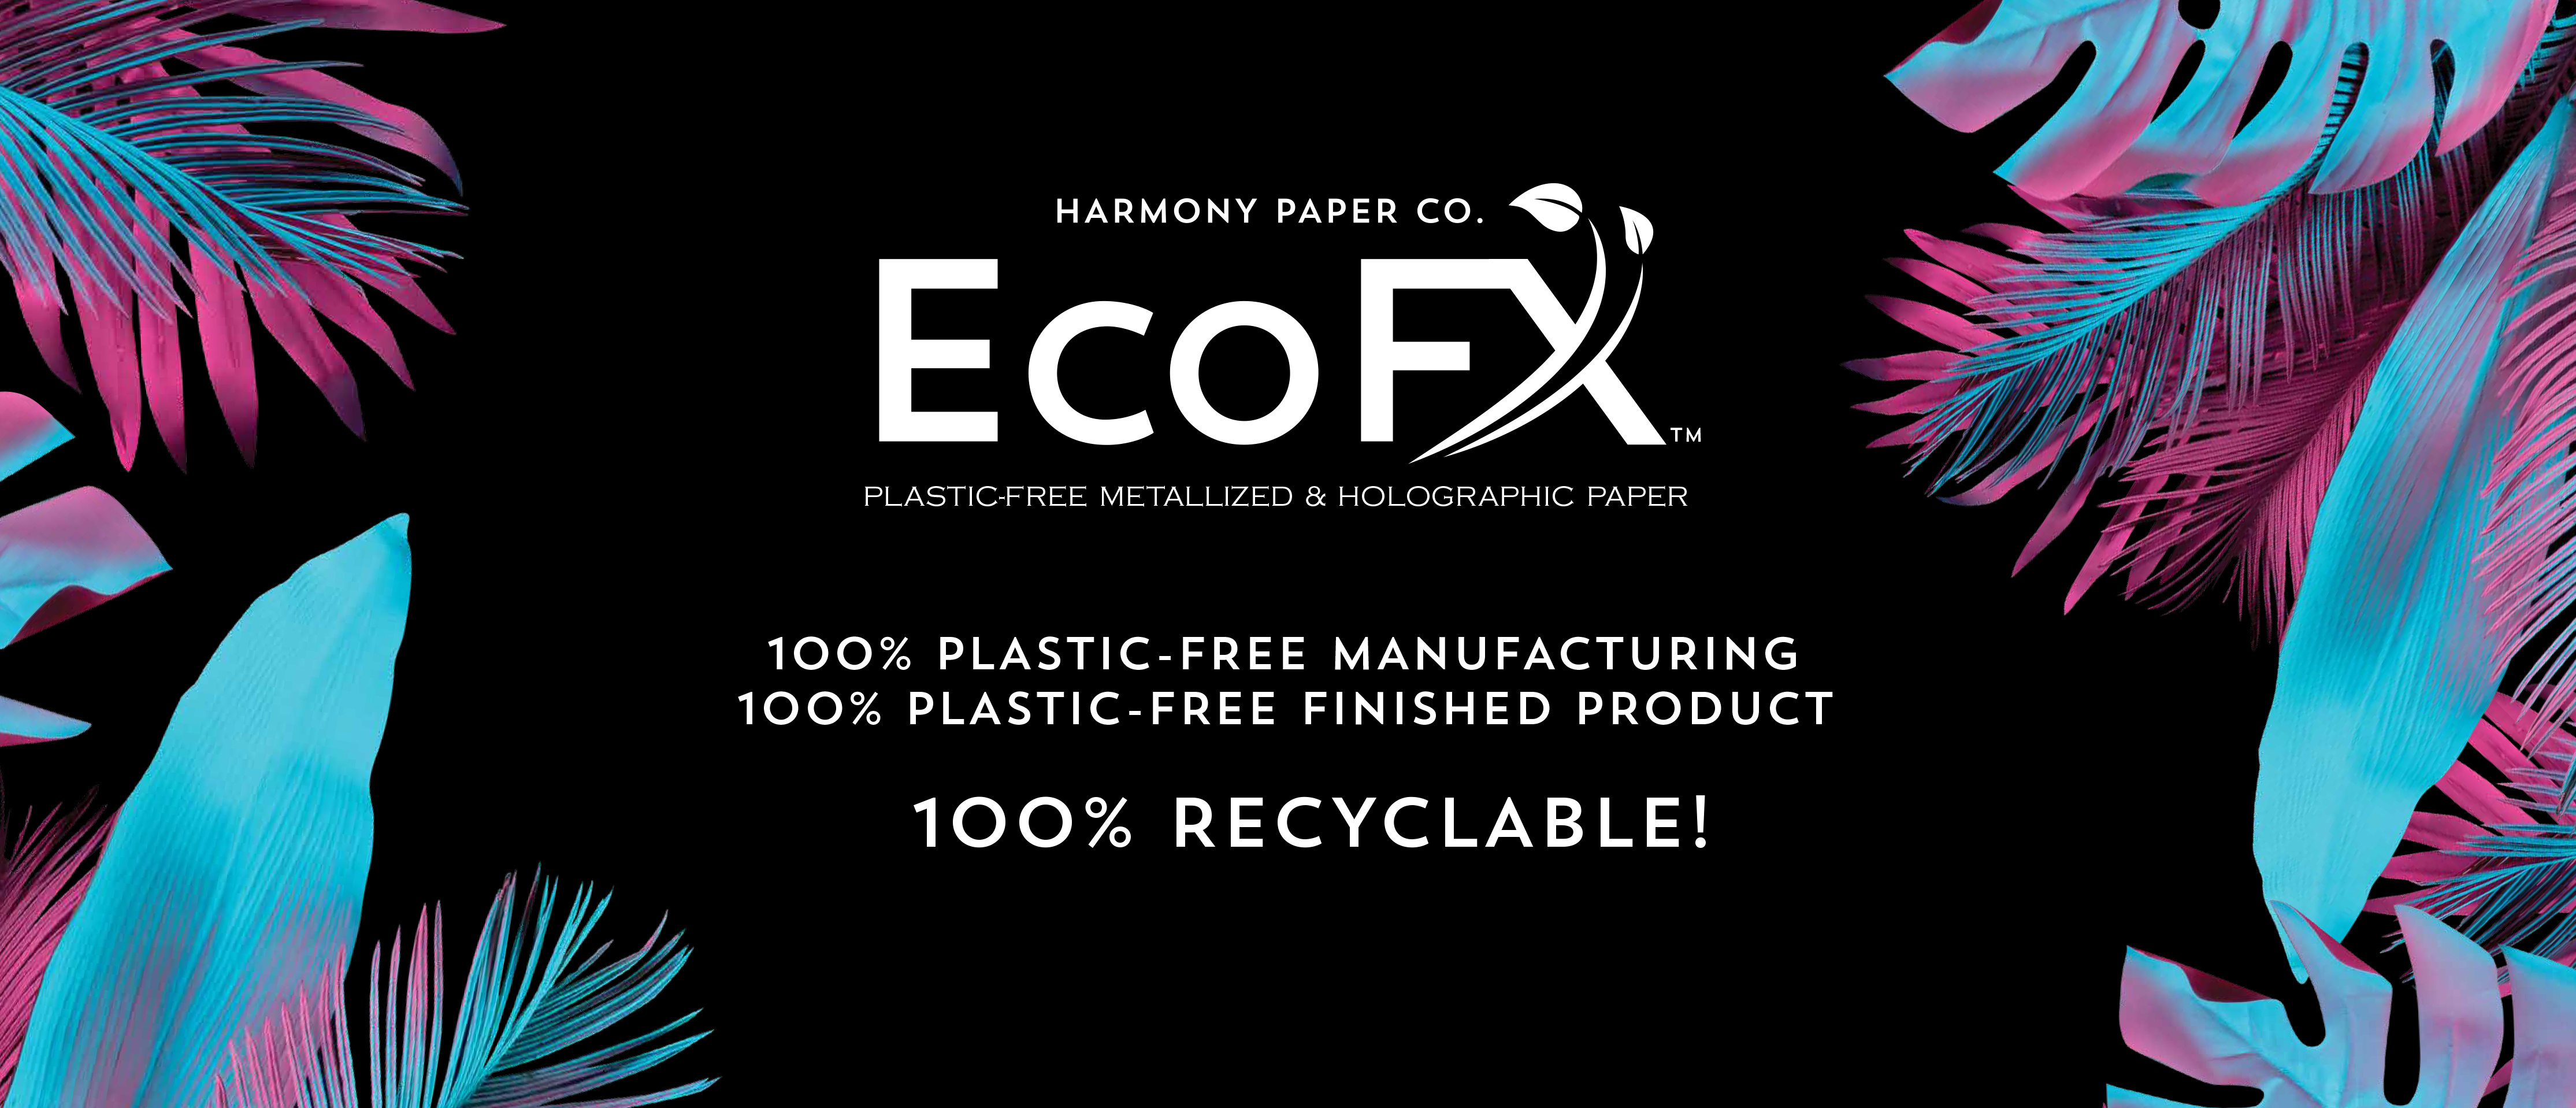 ECO-FX-RECYCLE-BANNER2